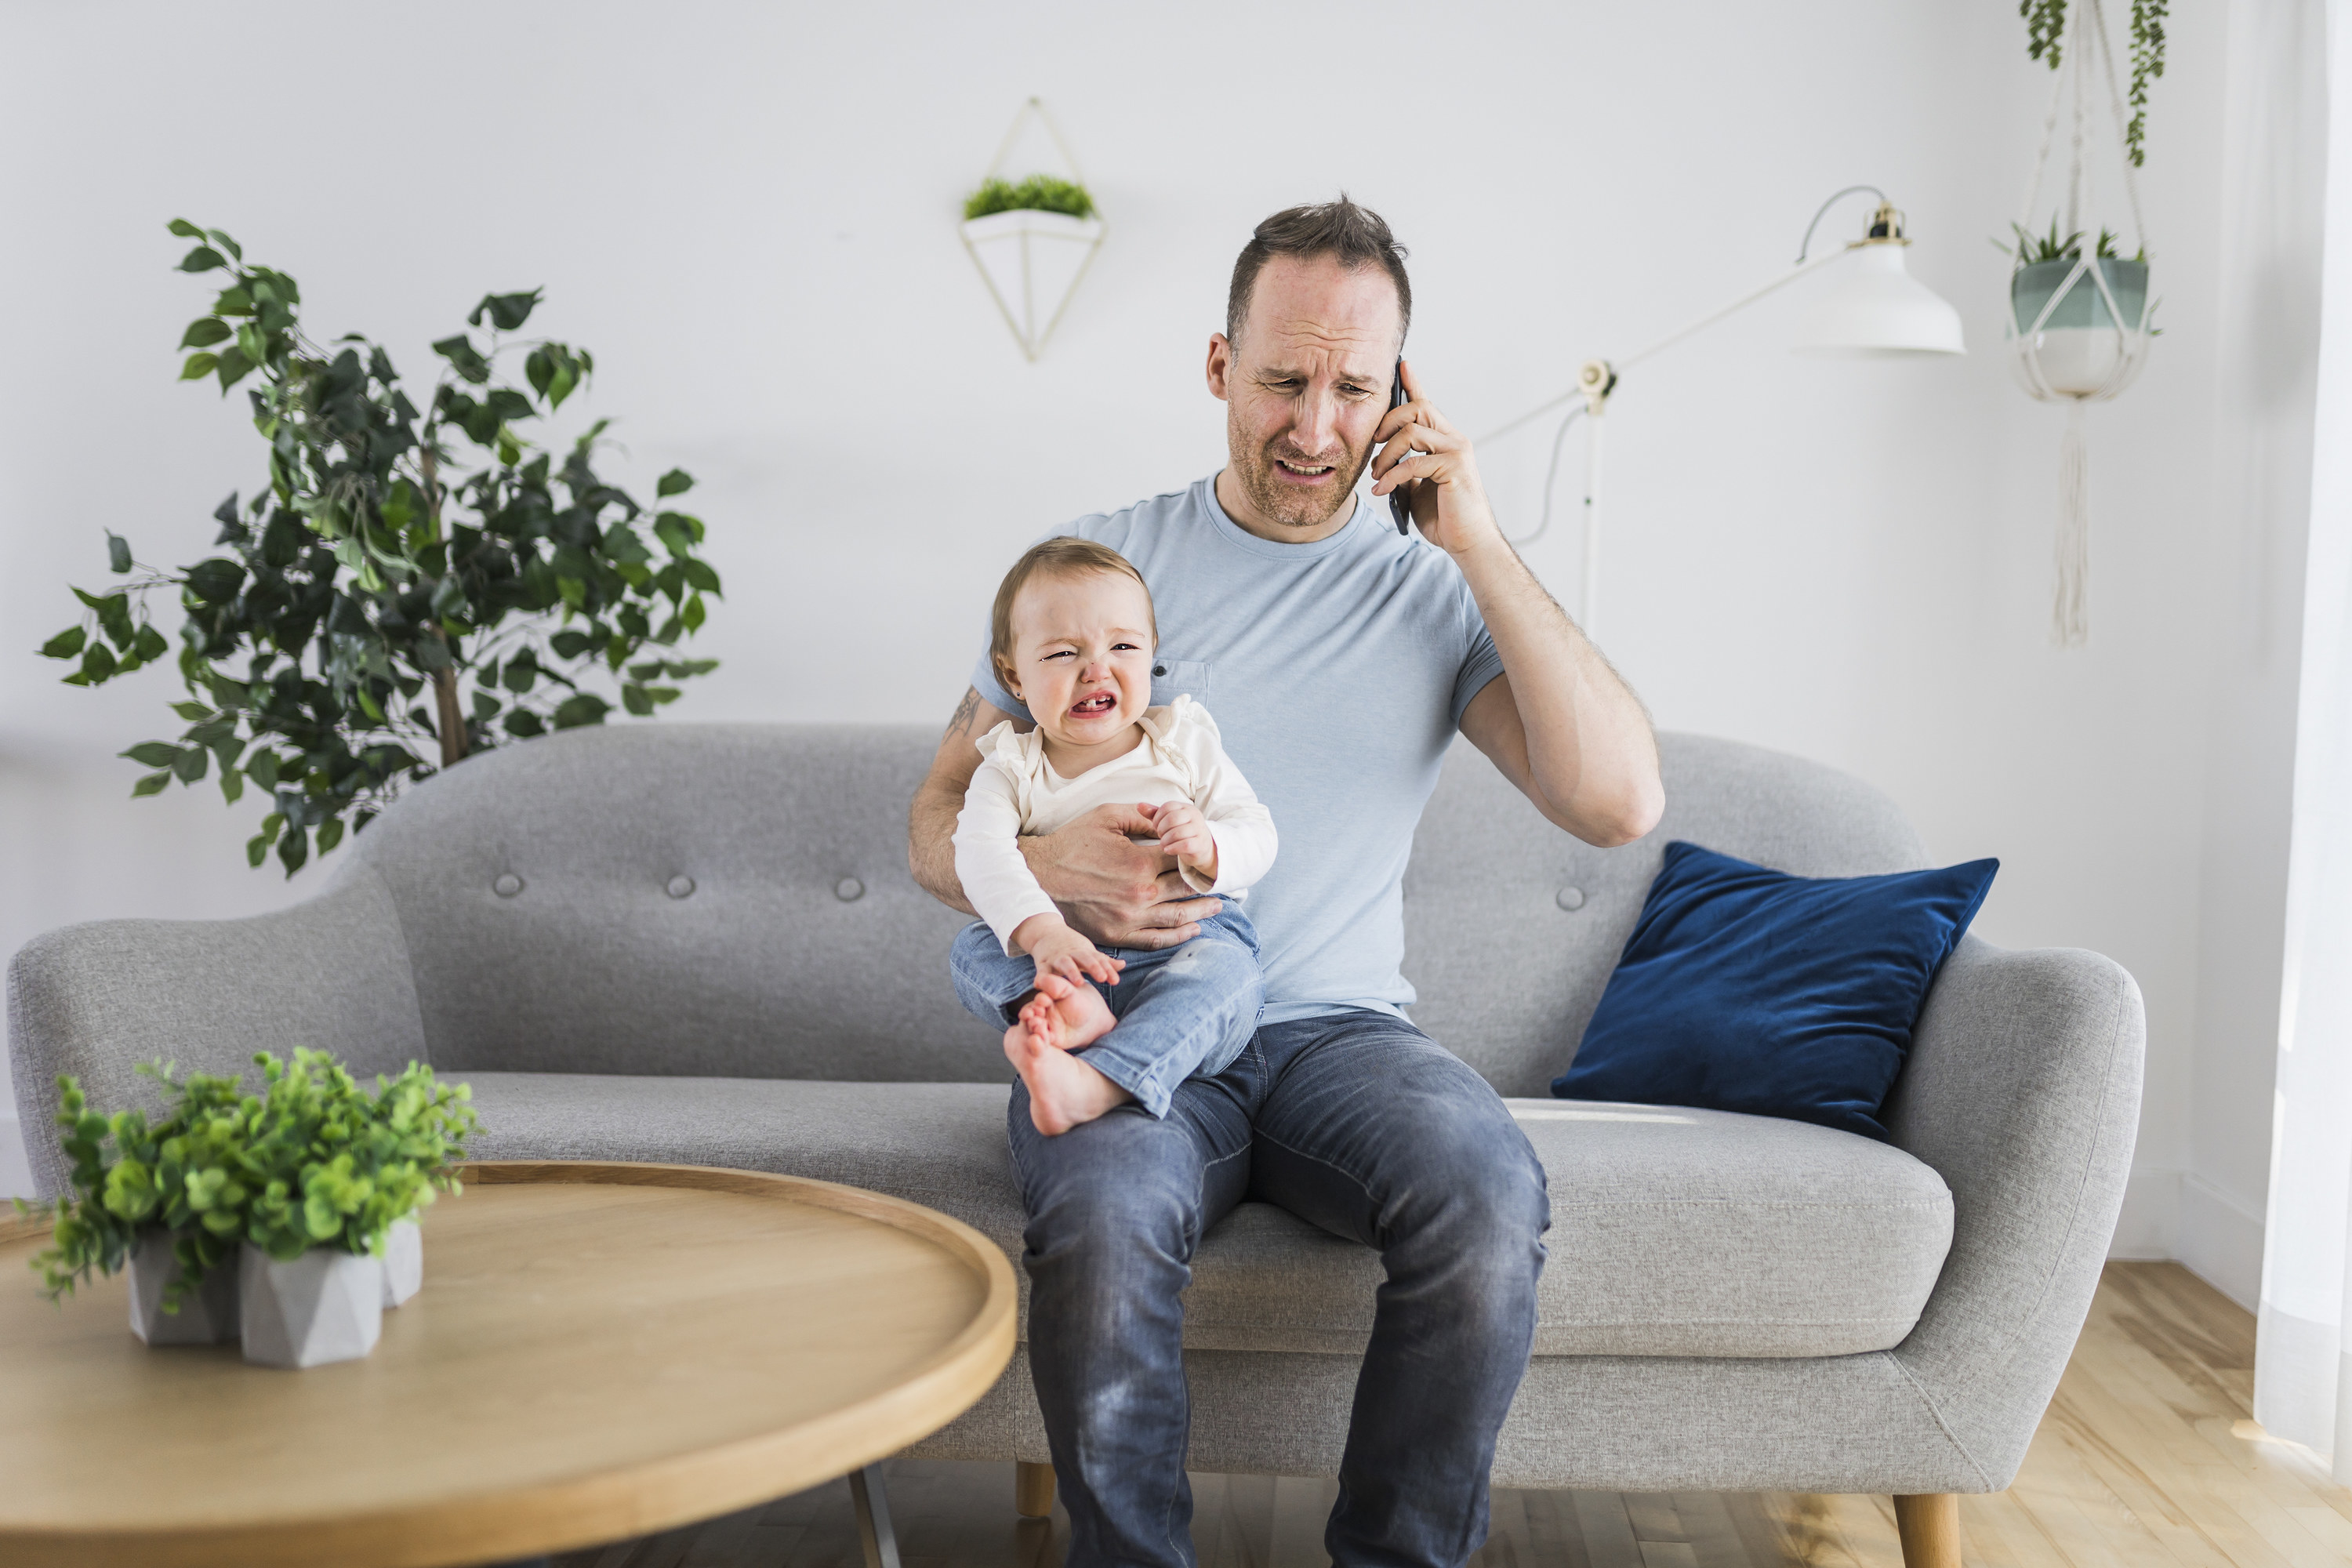 Dad yelling on phone while holding a baby